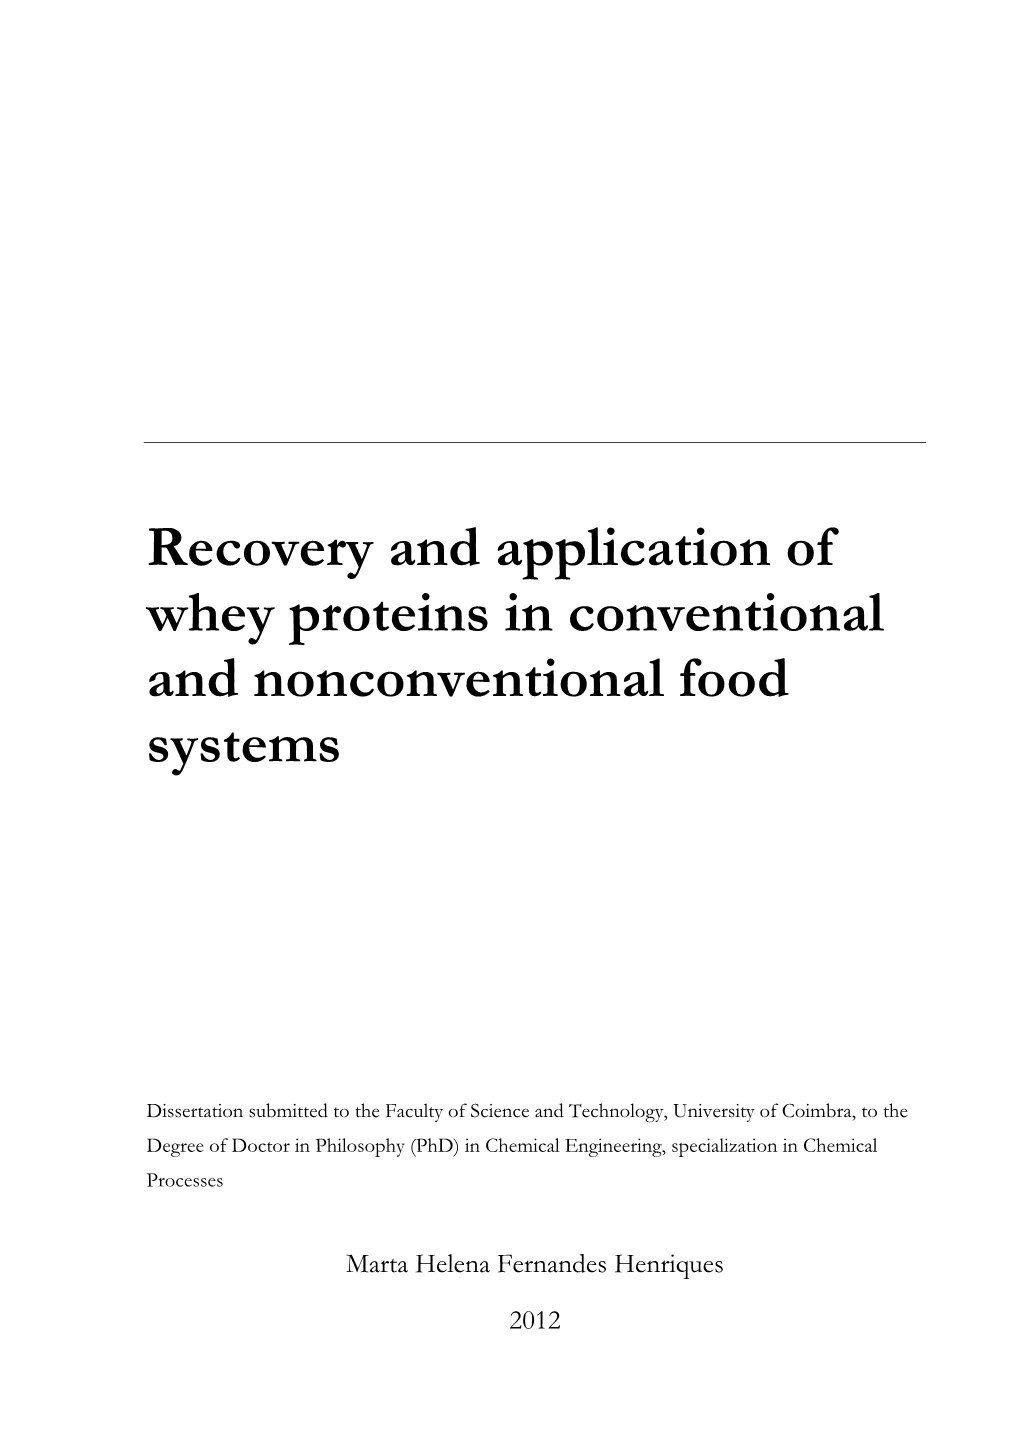 Recovery and Application of Whey Proteins in Conventional and Nonconventional Food Systems